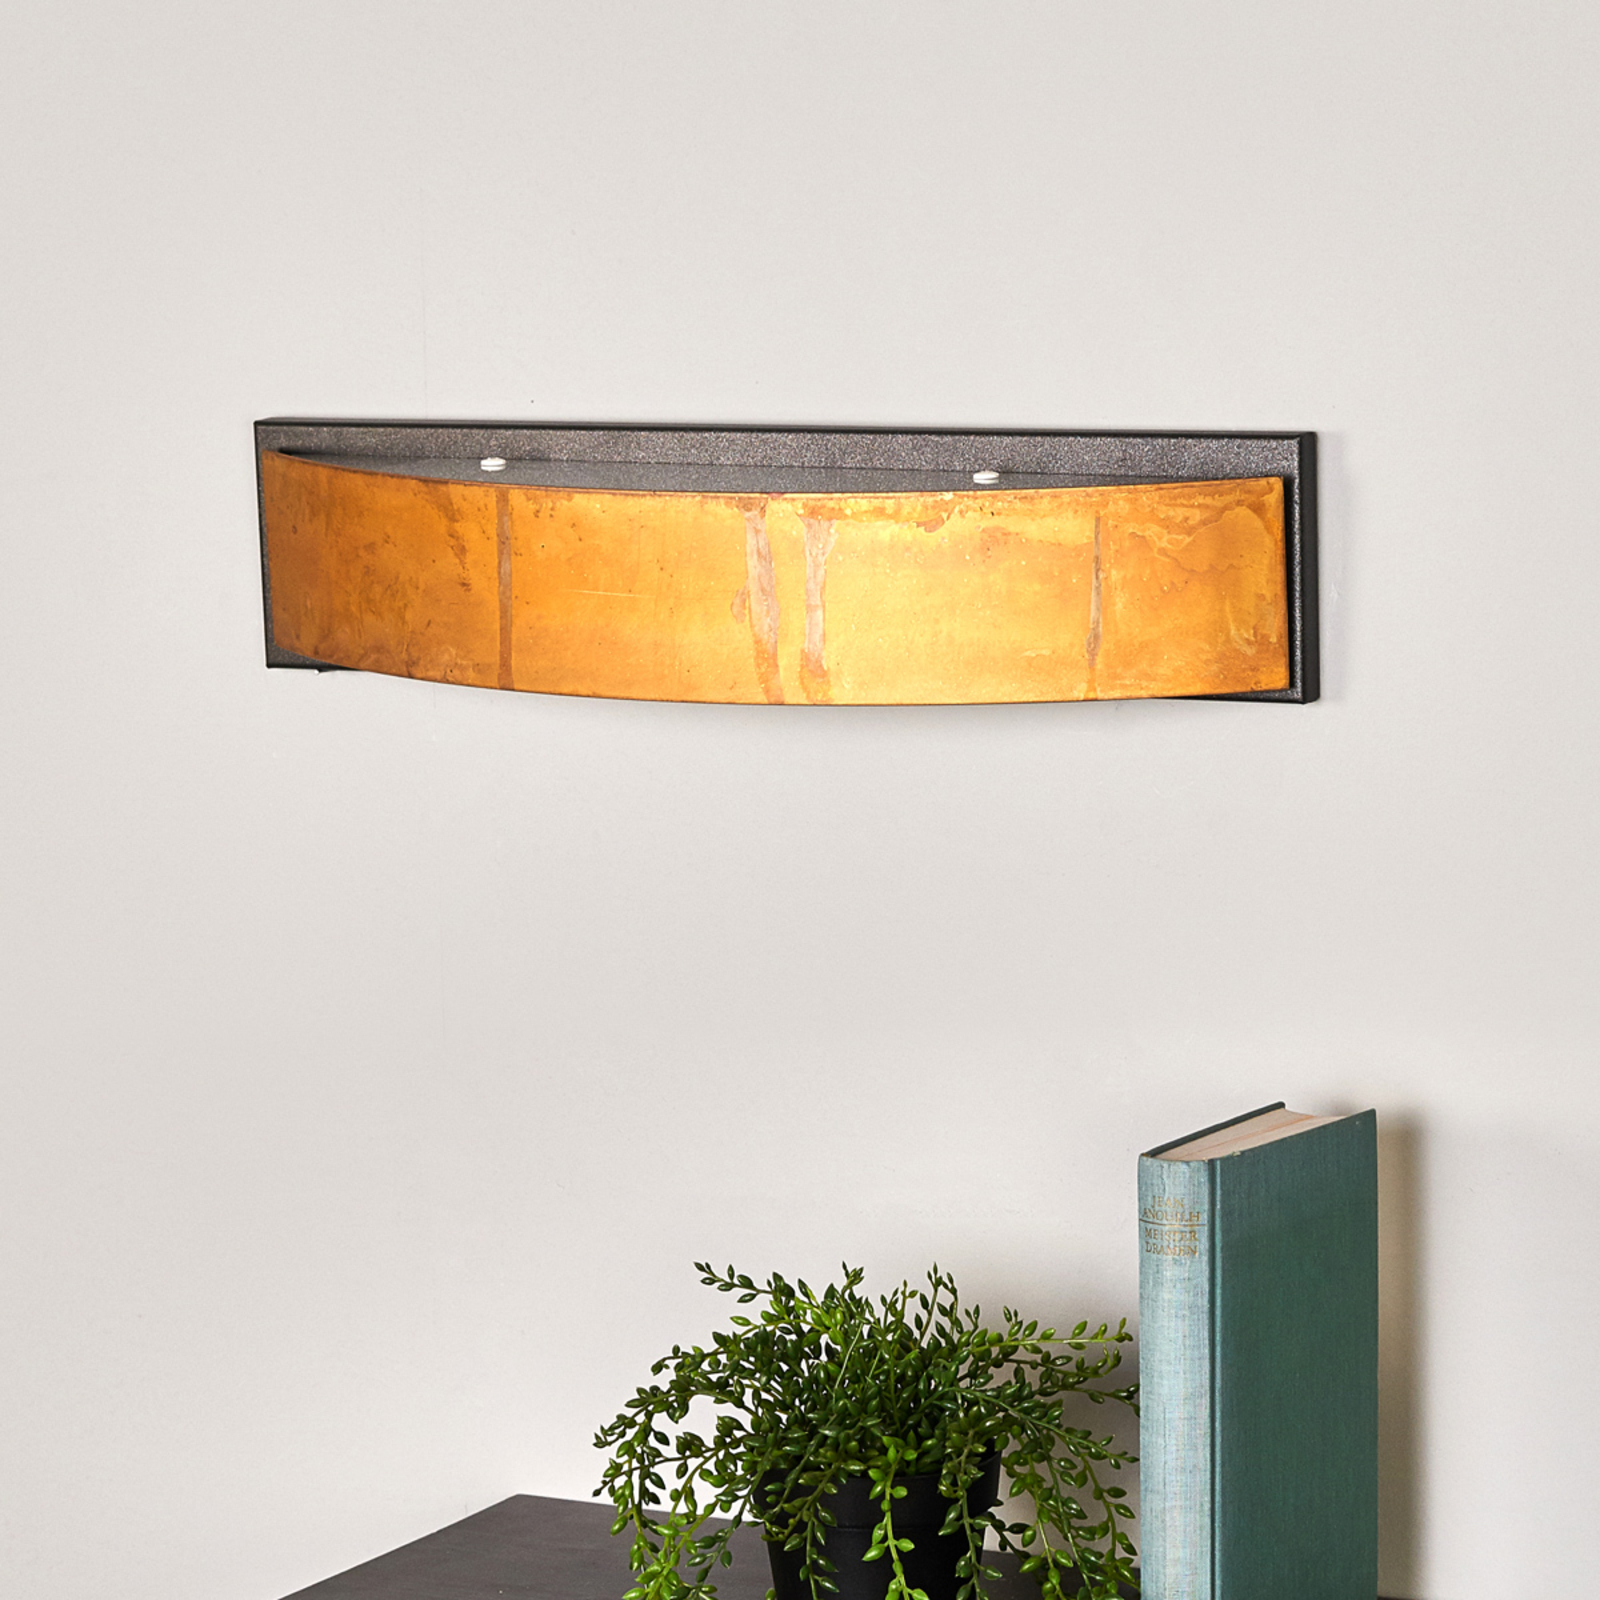 Exclusive wall lamp LOLA brown